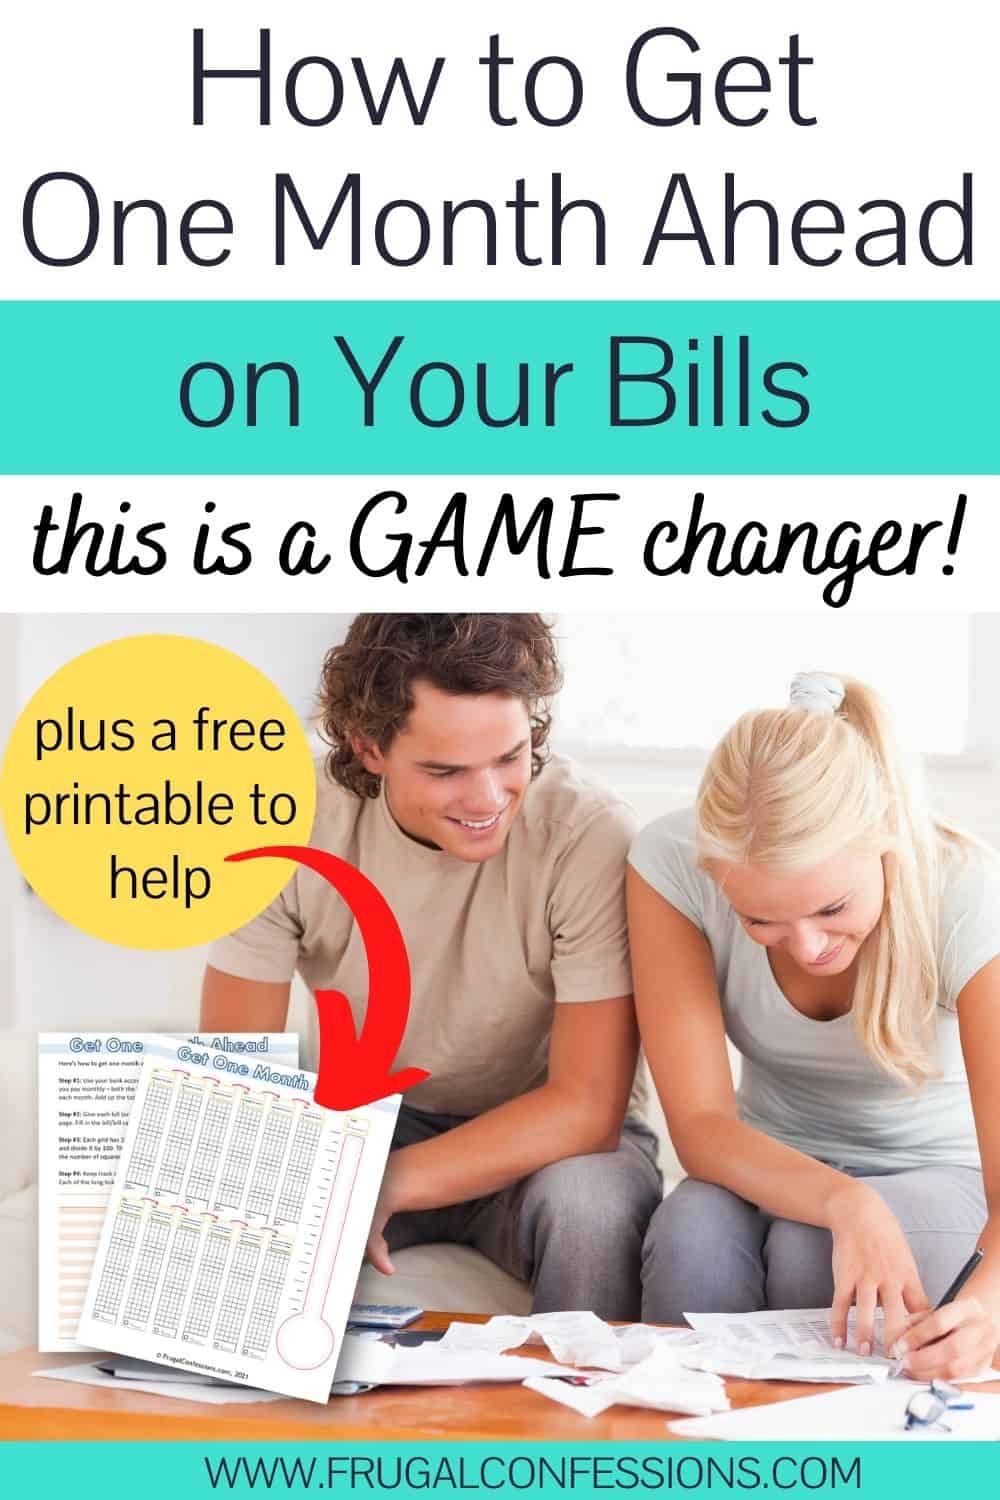 young couple working on worksheets at table, smiling, text overlay "how to get one month ahead on bills - this is a game changer, with printable"